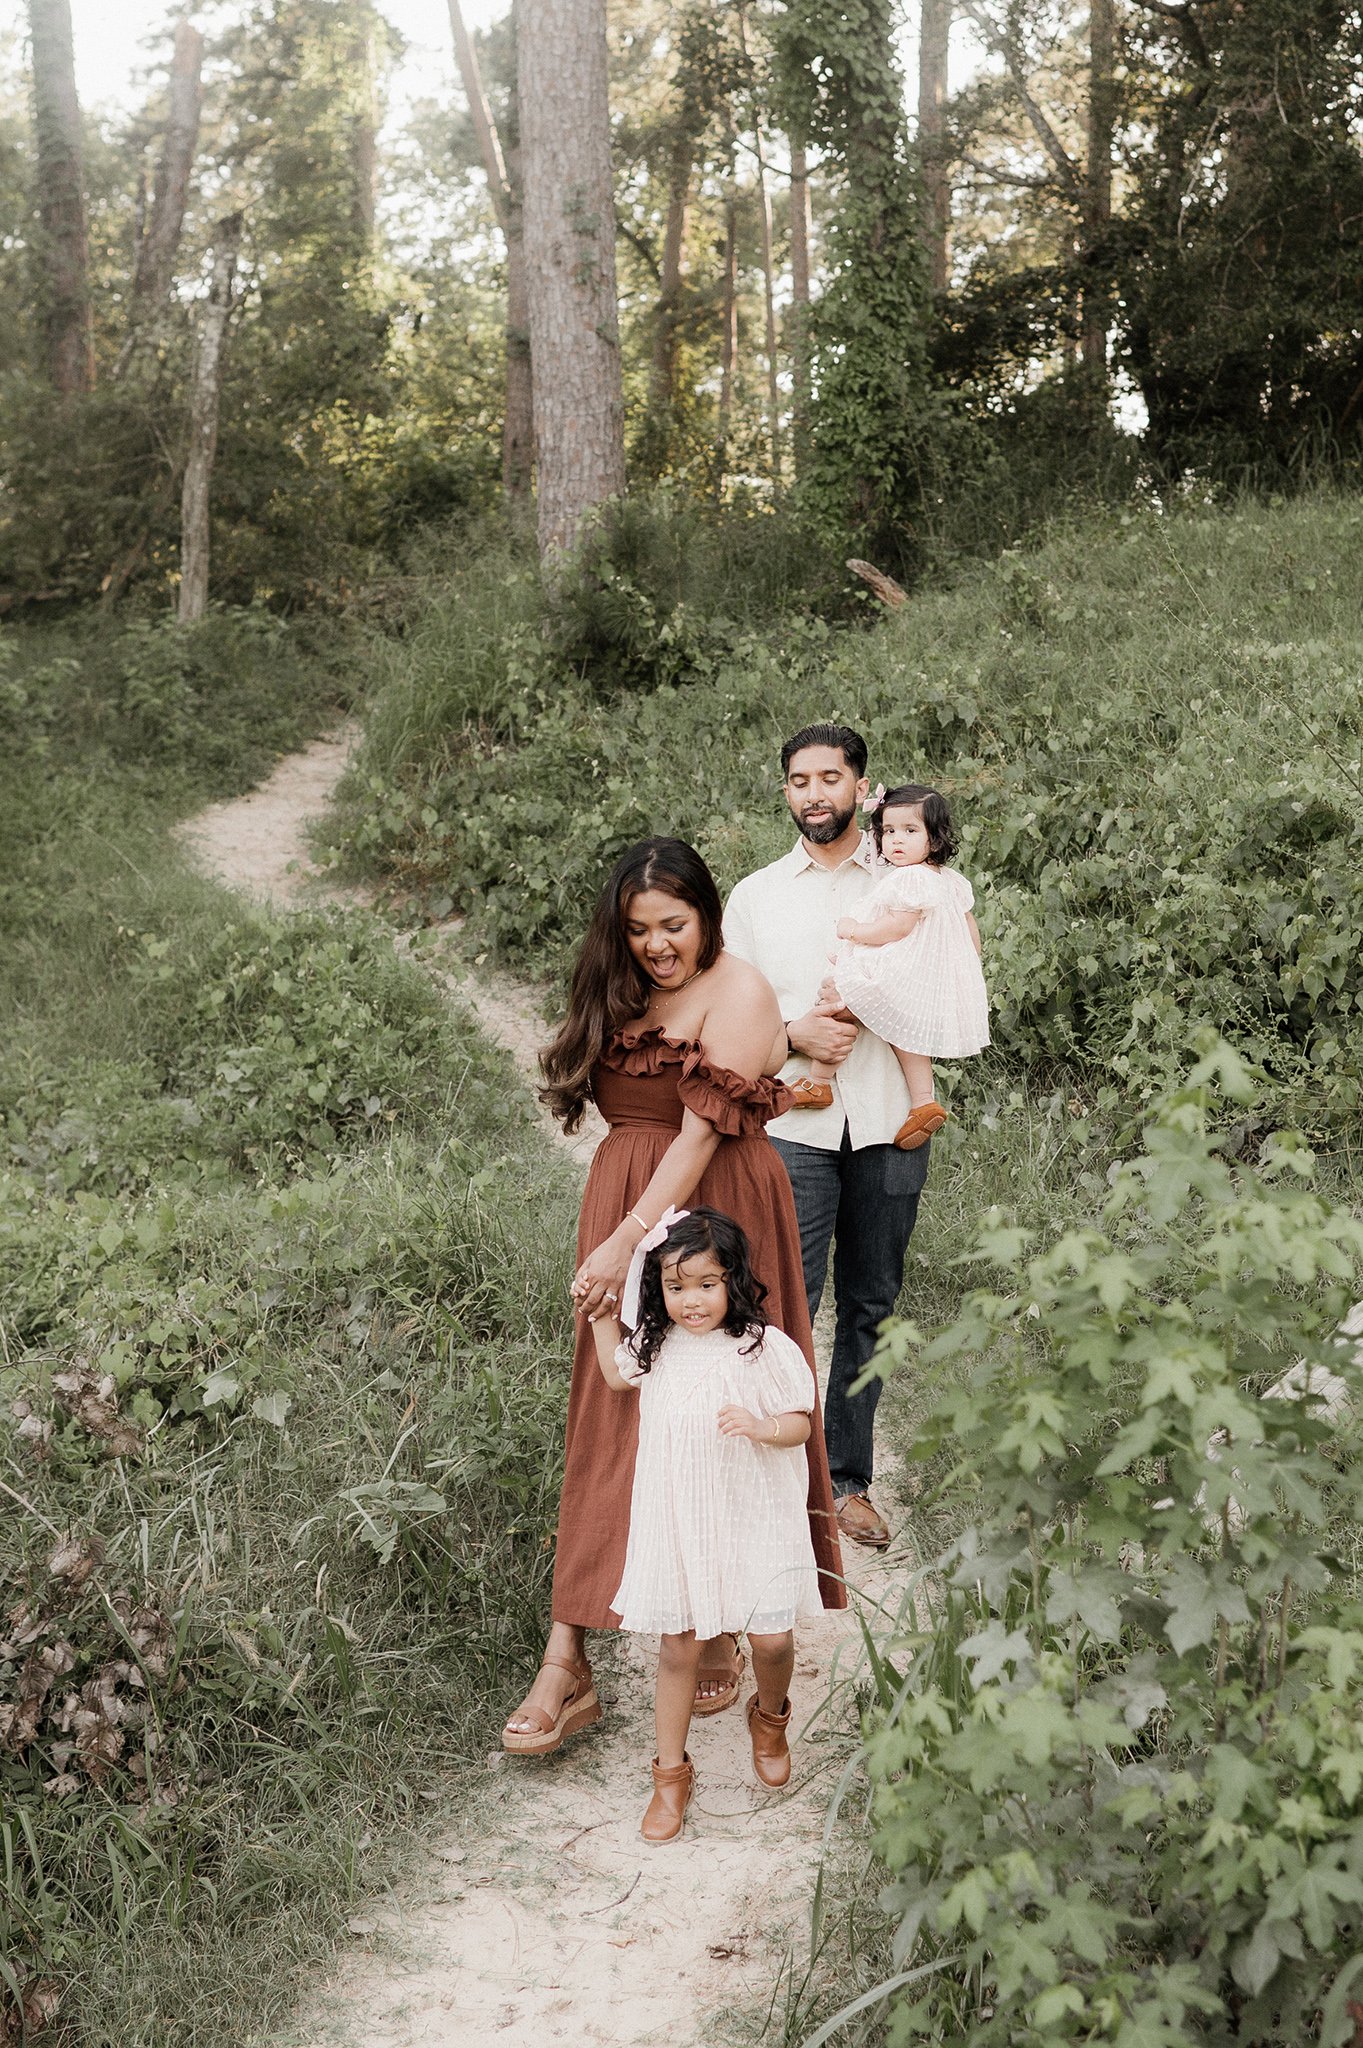 the woodlands family photographer _ conroe photographer _ houston family photographer _ ashley gillen photography _ texas family photographer _ conroe wedding photographer _ conroe texas _ cshi3.jpg